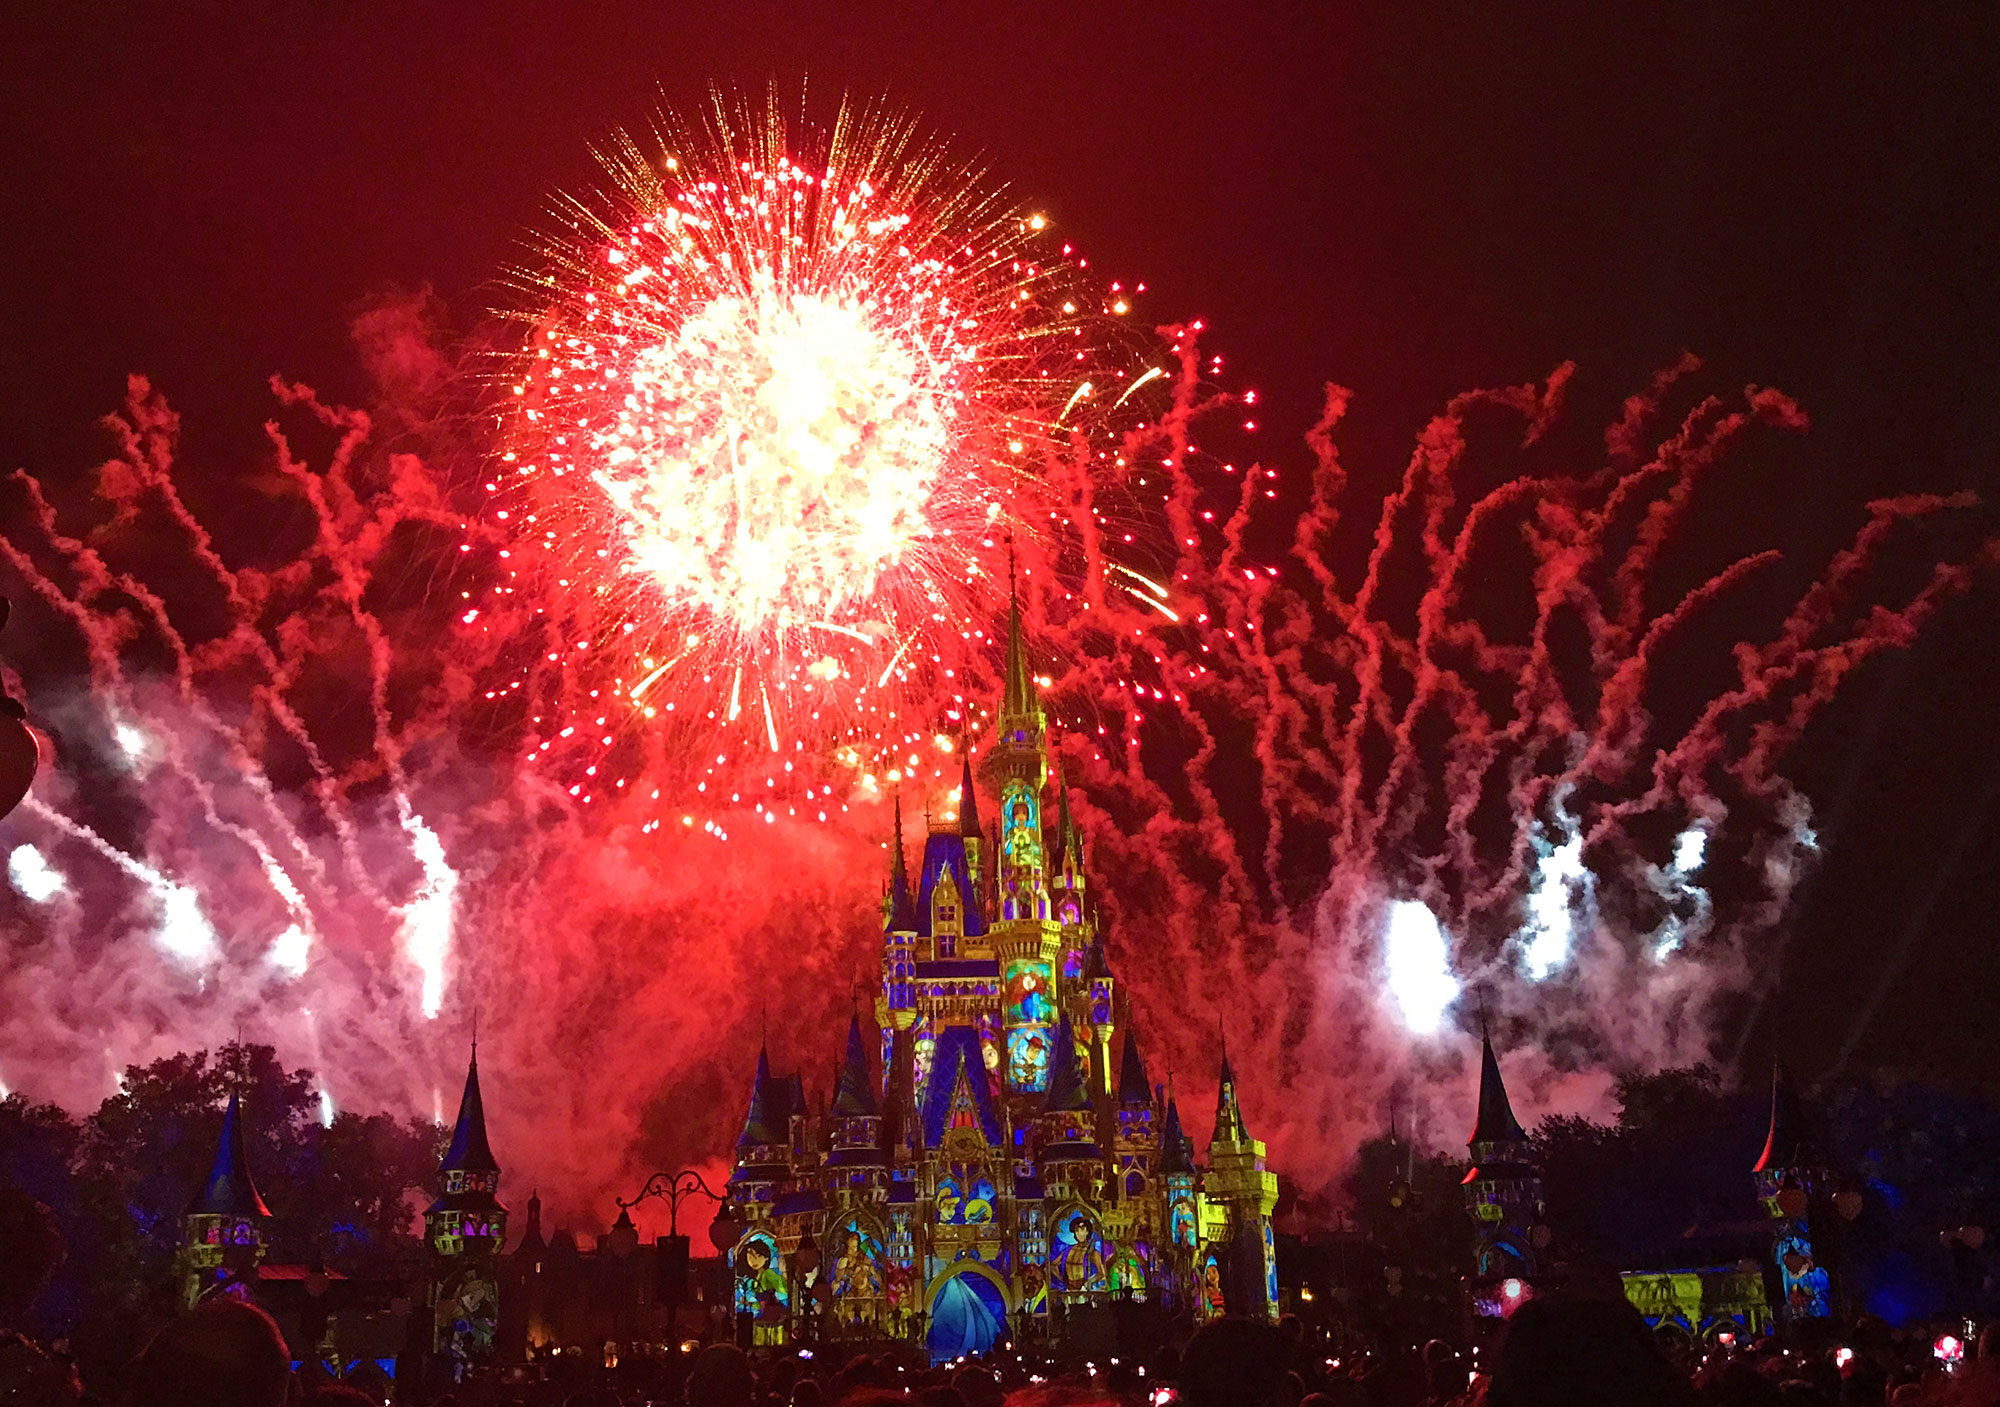 Happily Ever After Fireworks Show at the Magic Kingdom